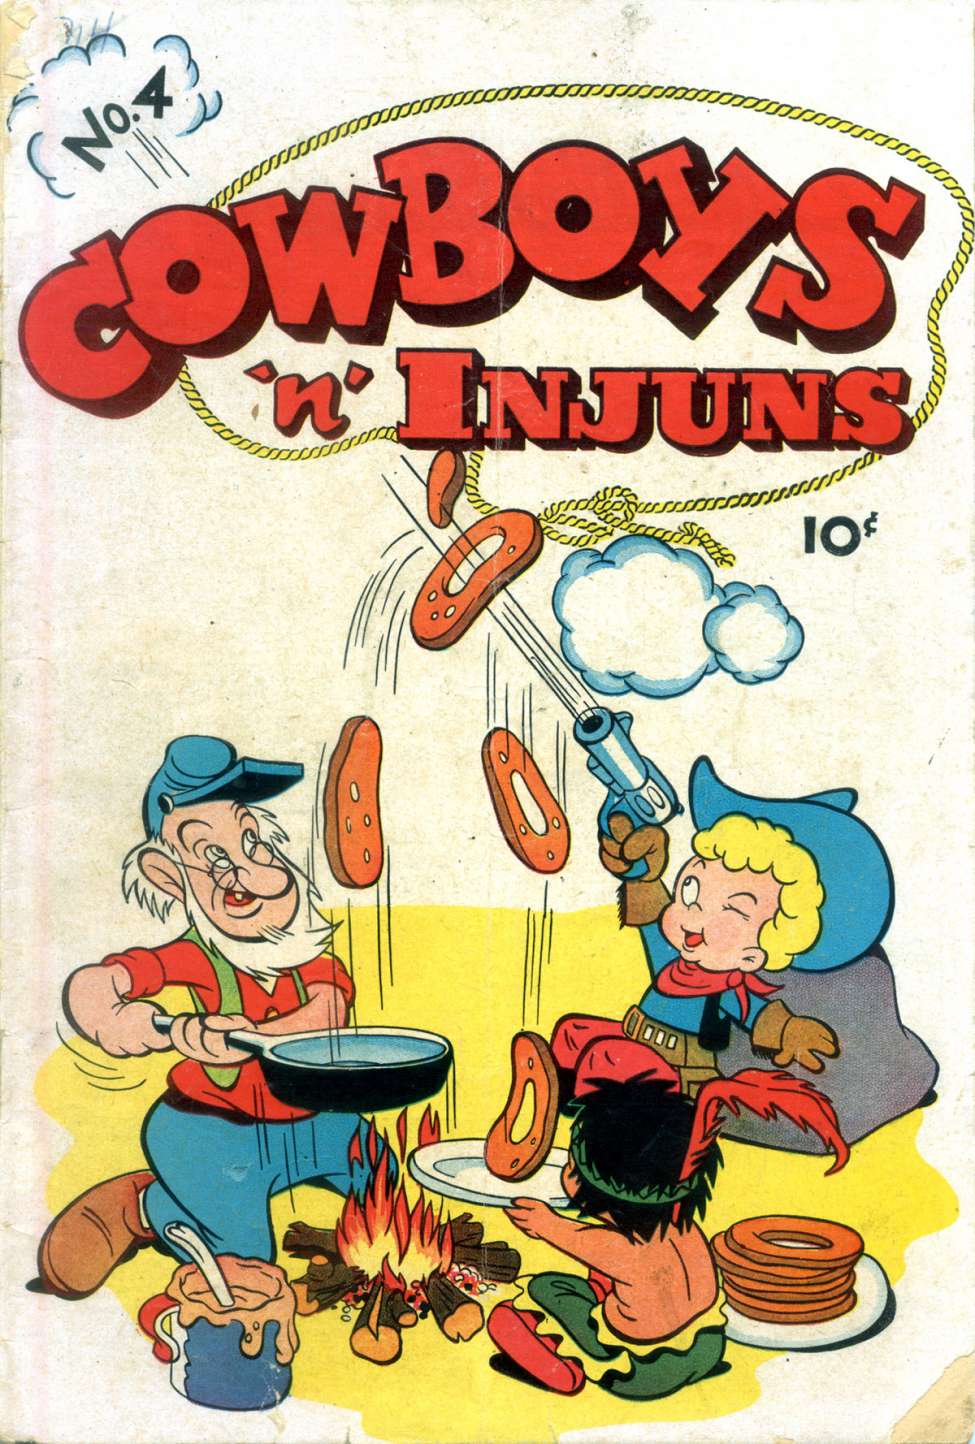 Comic Book Cover For Cowboys 'N' Injuns 4